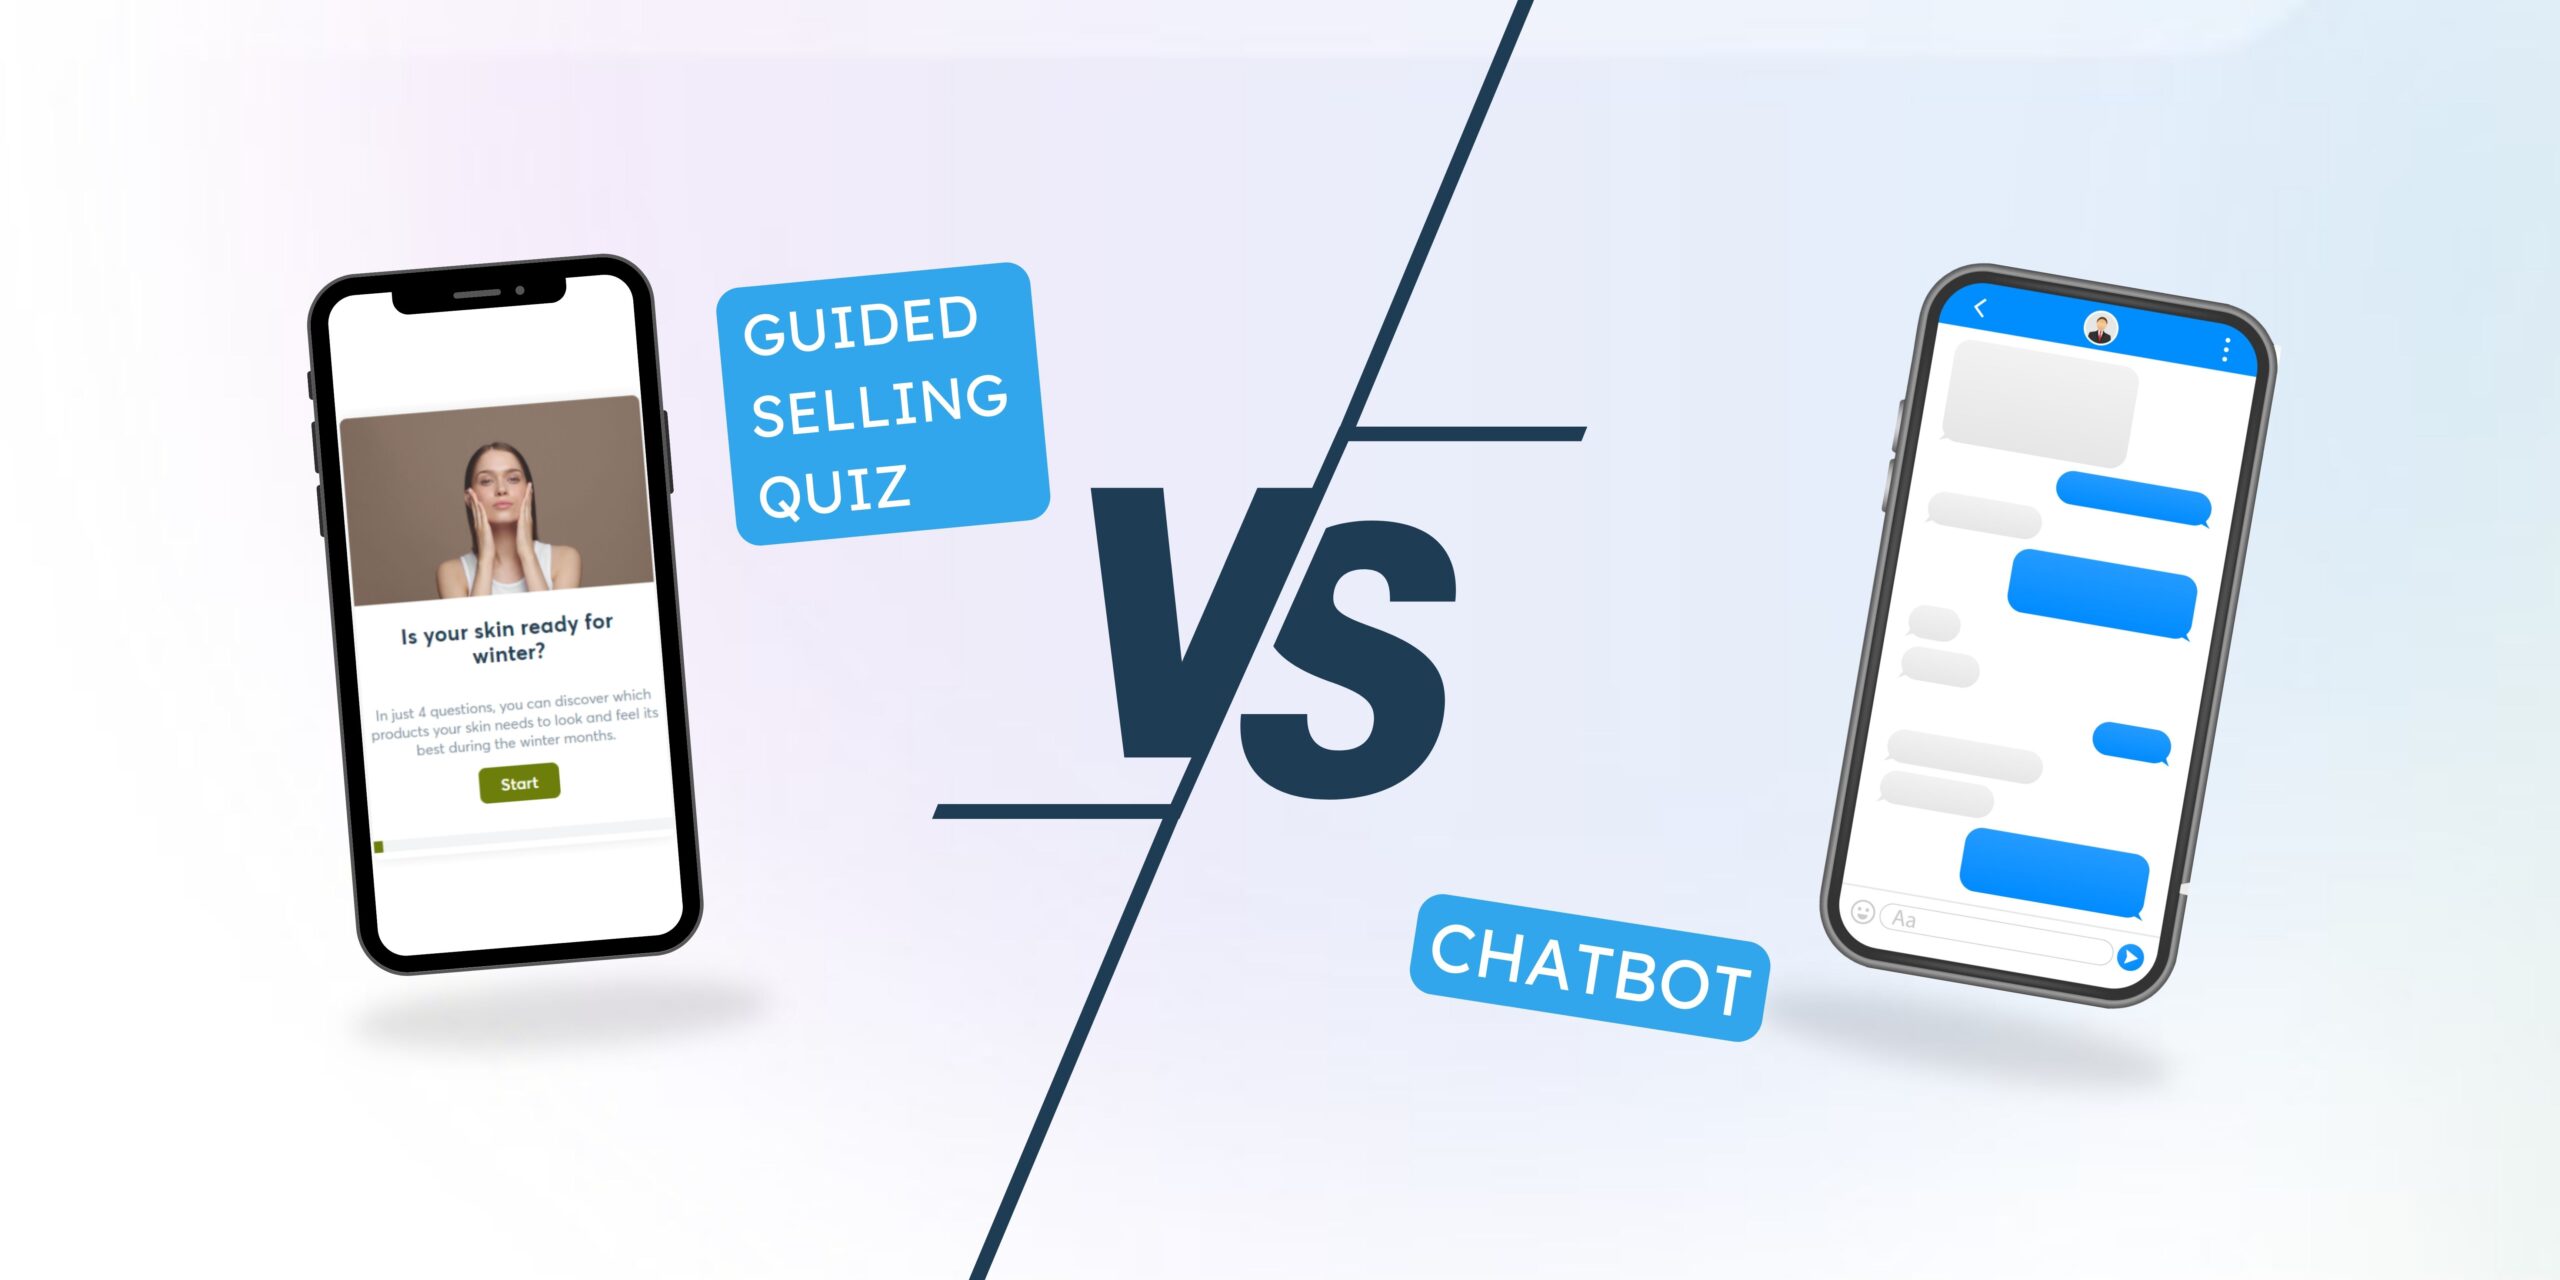 Guided Selling Quiz vs Chatbox